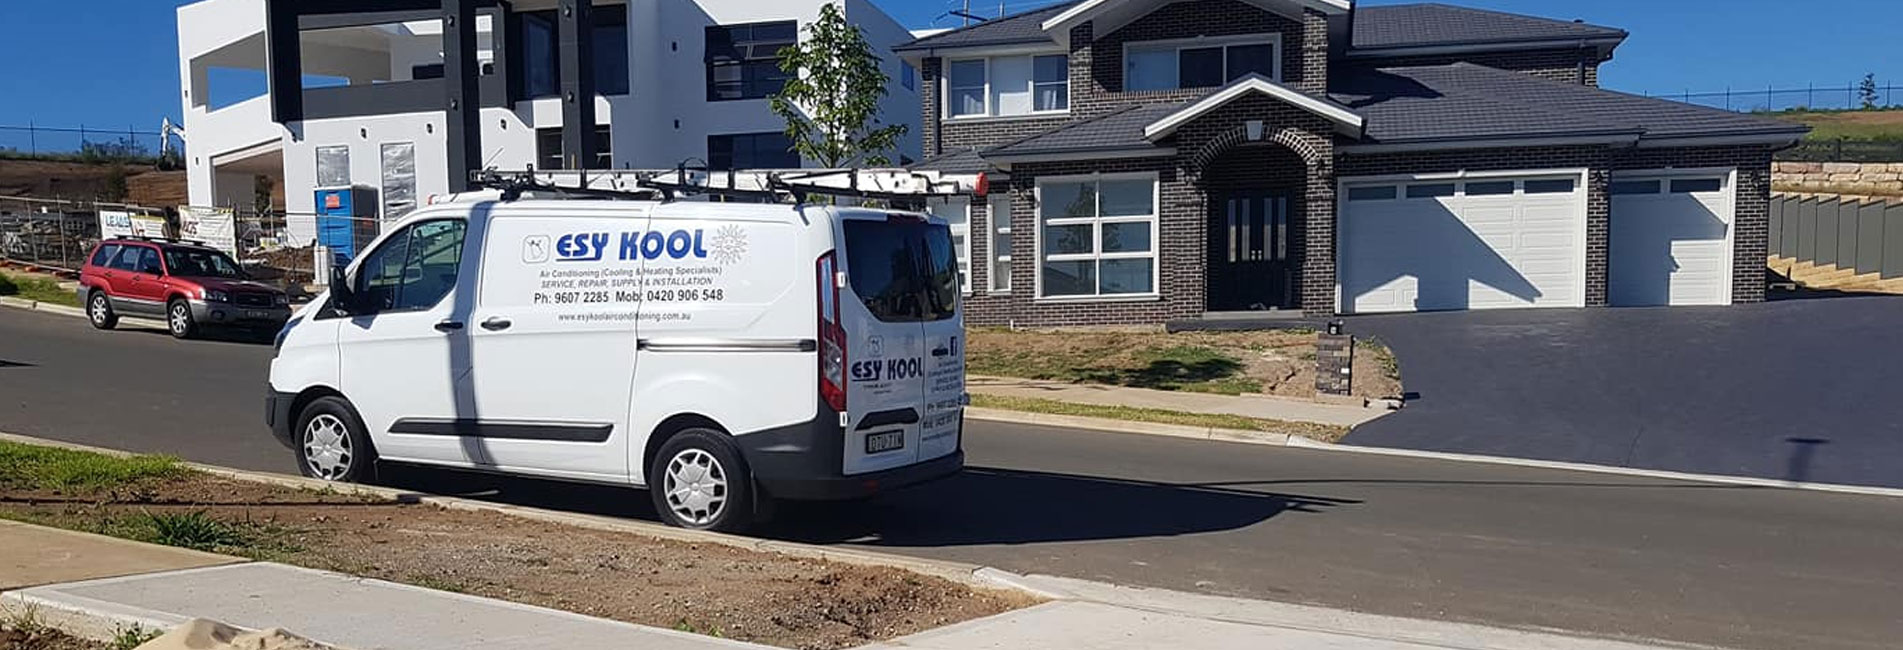 Air Conditioning Services Glenfield, Reverse Cycle Air Con Cartwright, Ducted Air Conditioning Minto, Air Conditioning Maintenance Ingleburn, Airconditioning Installation Prestons